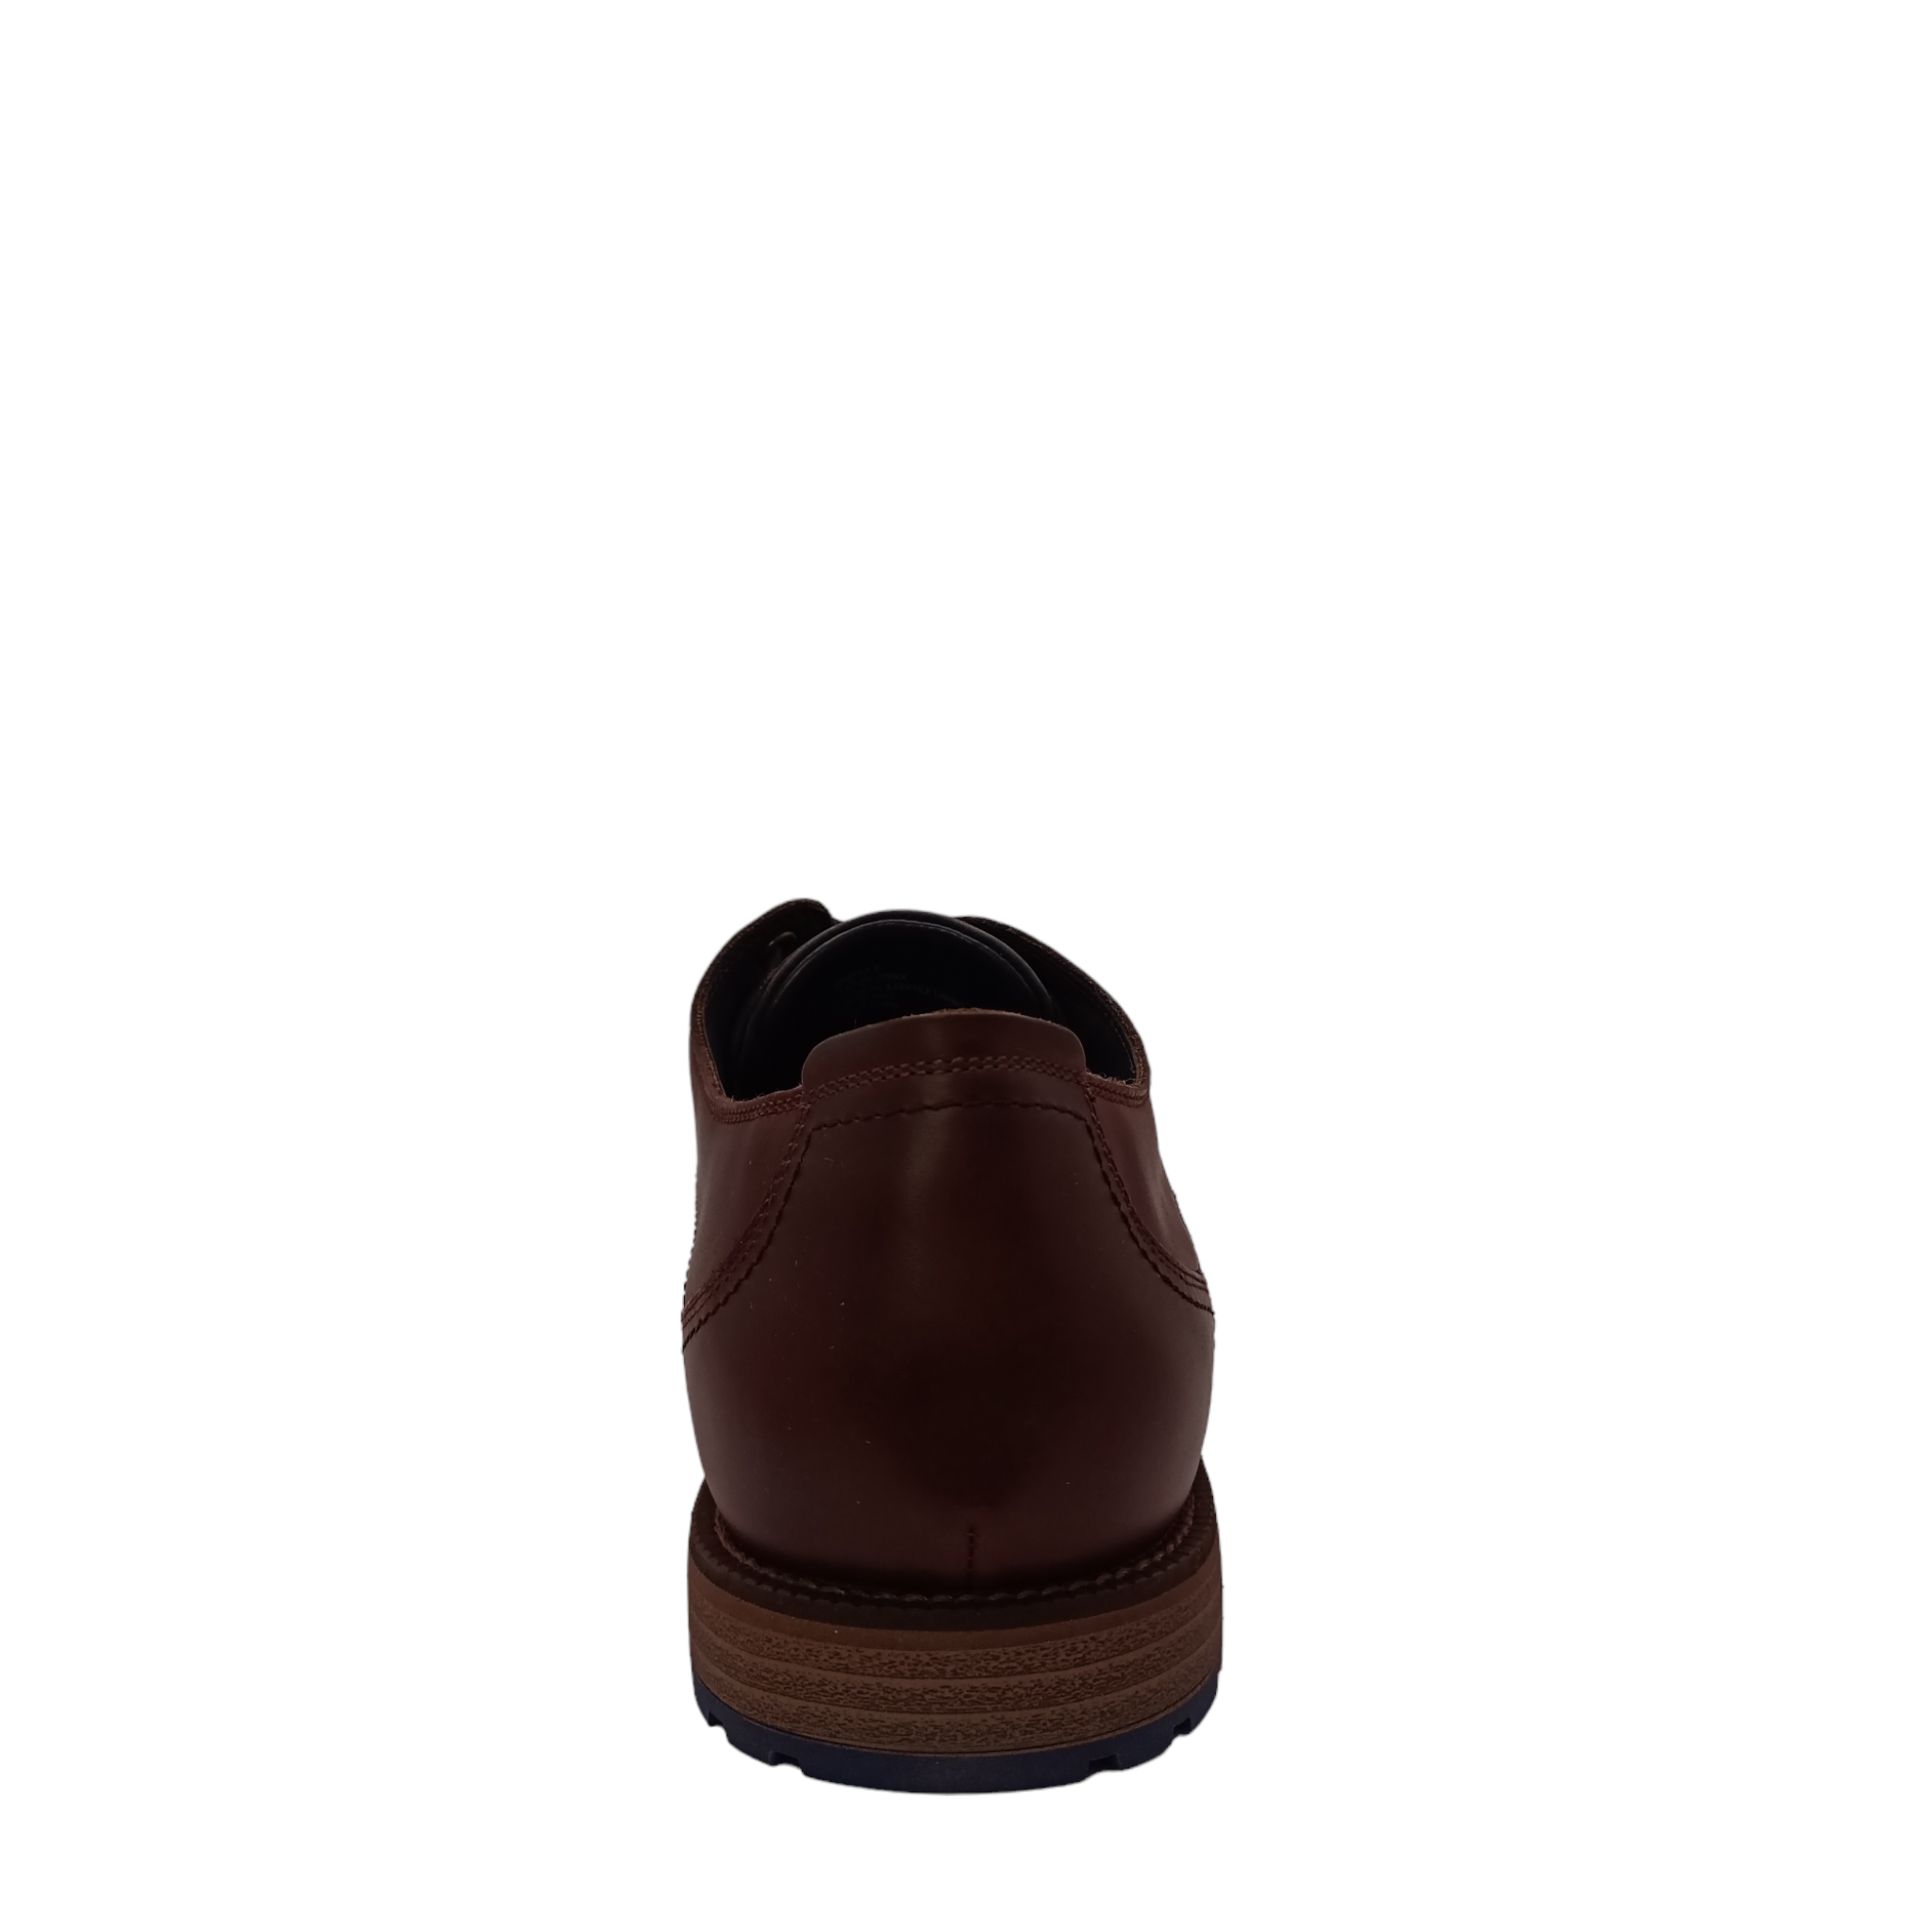 Shop Render Julius Marlow - with shoe&amp;me - from Julius Marlow - Shoes - Mens, Shoe, Winter